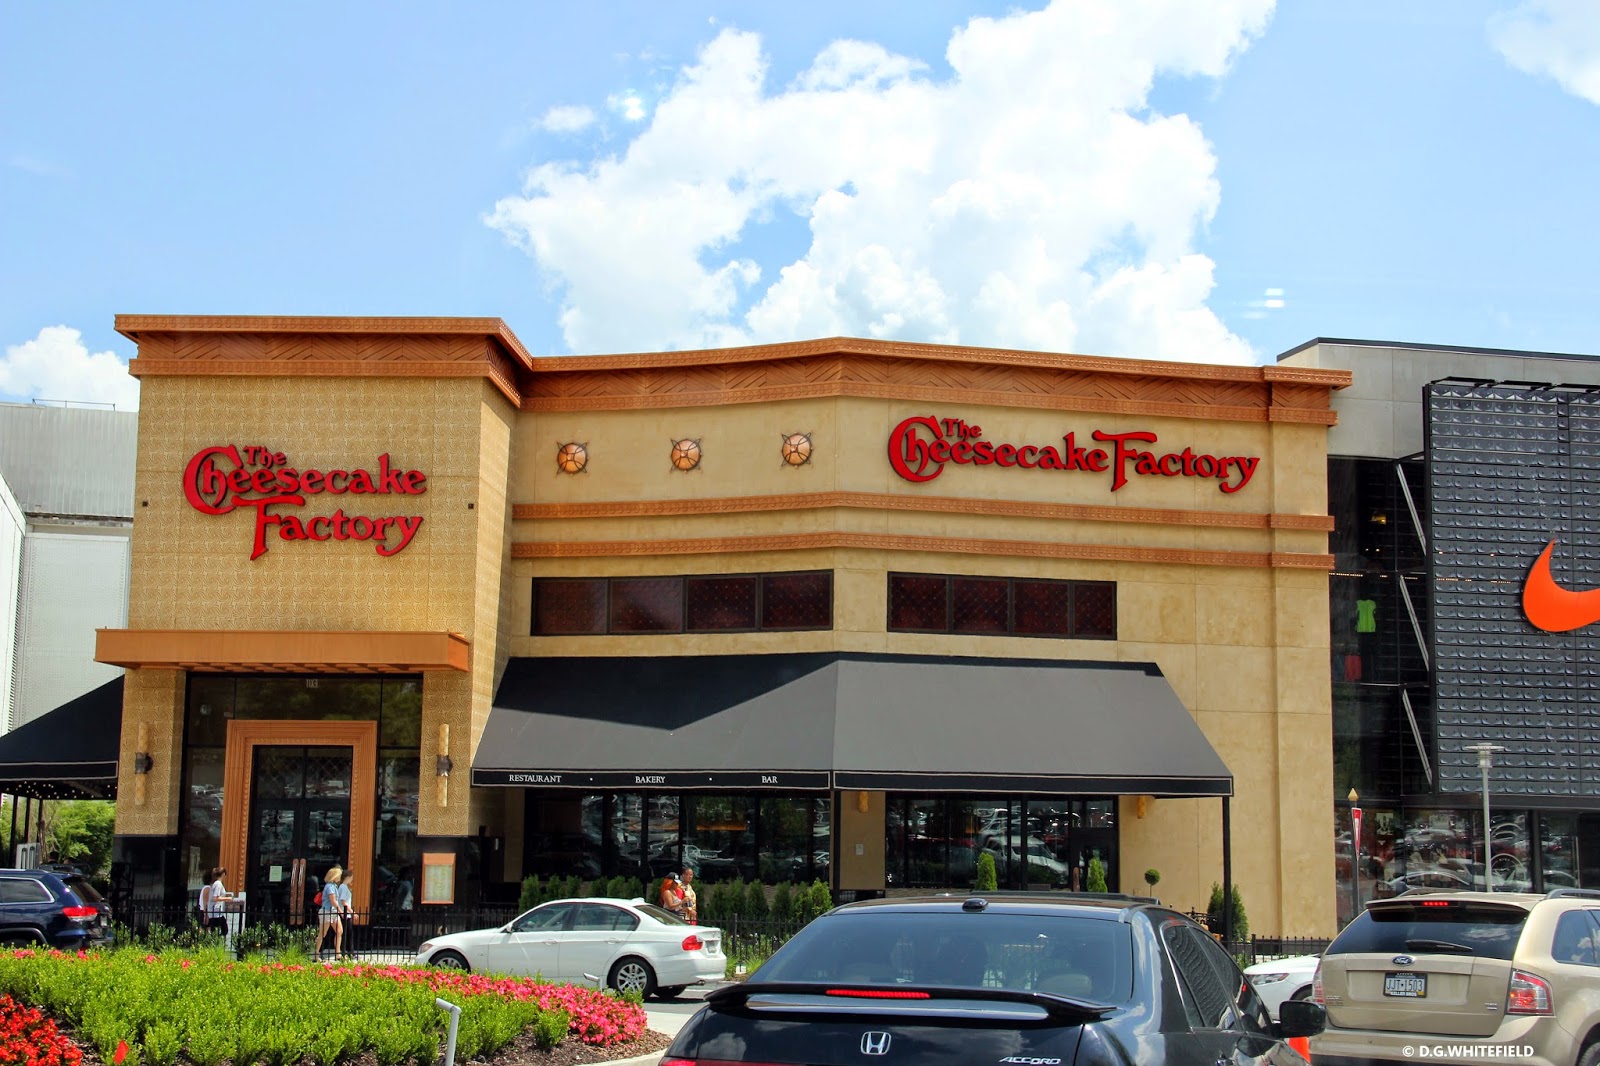 NEXT STOPDECATUR: The Cheesecake Factory at Lenox Opens June 5